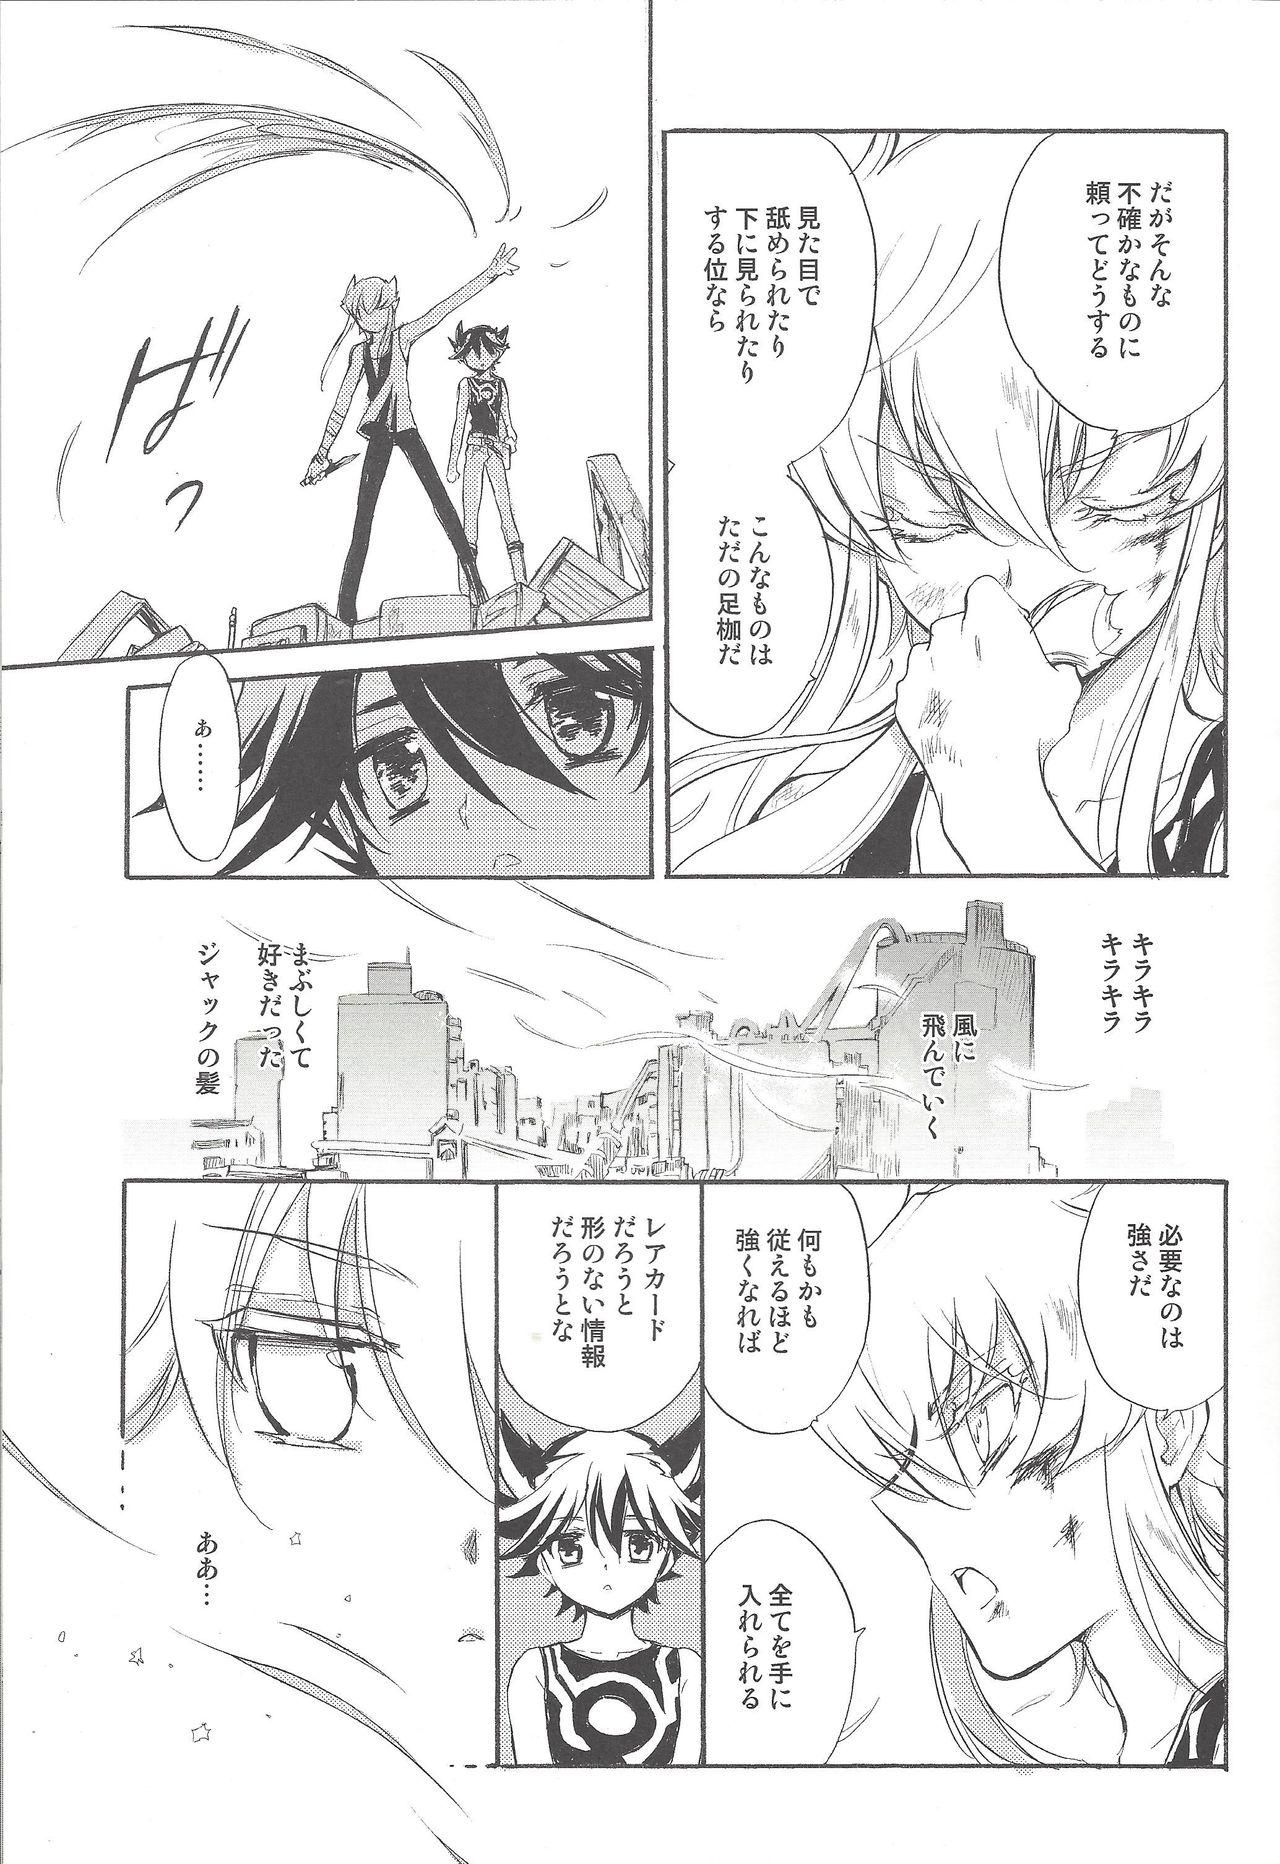 Sislovesme Hoshi no Love Letter - Yu-gi-oh 5ds Soles - Page 12